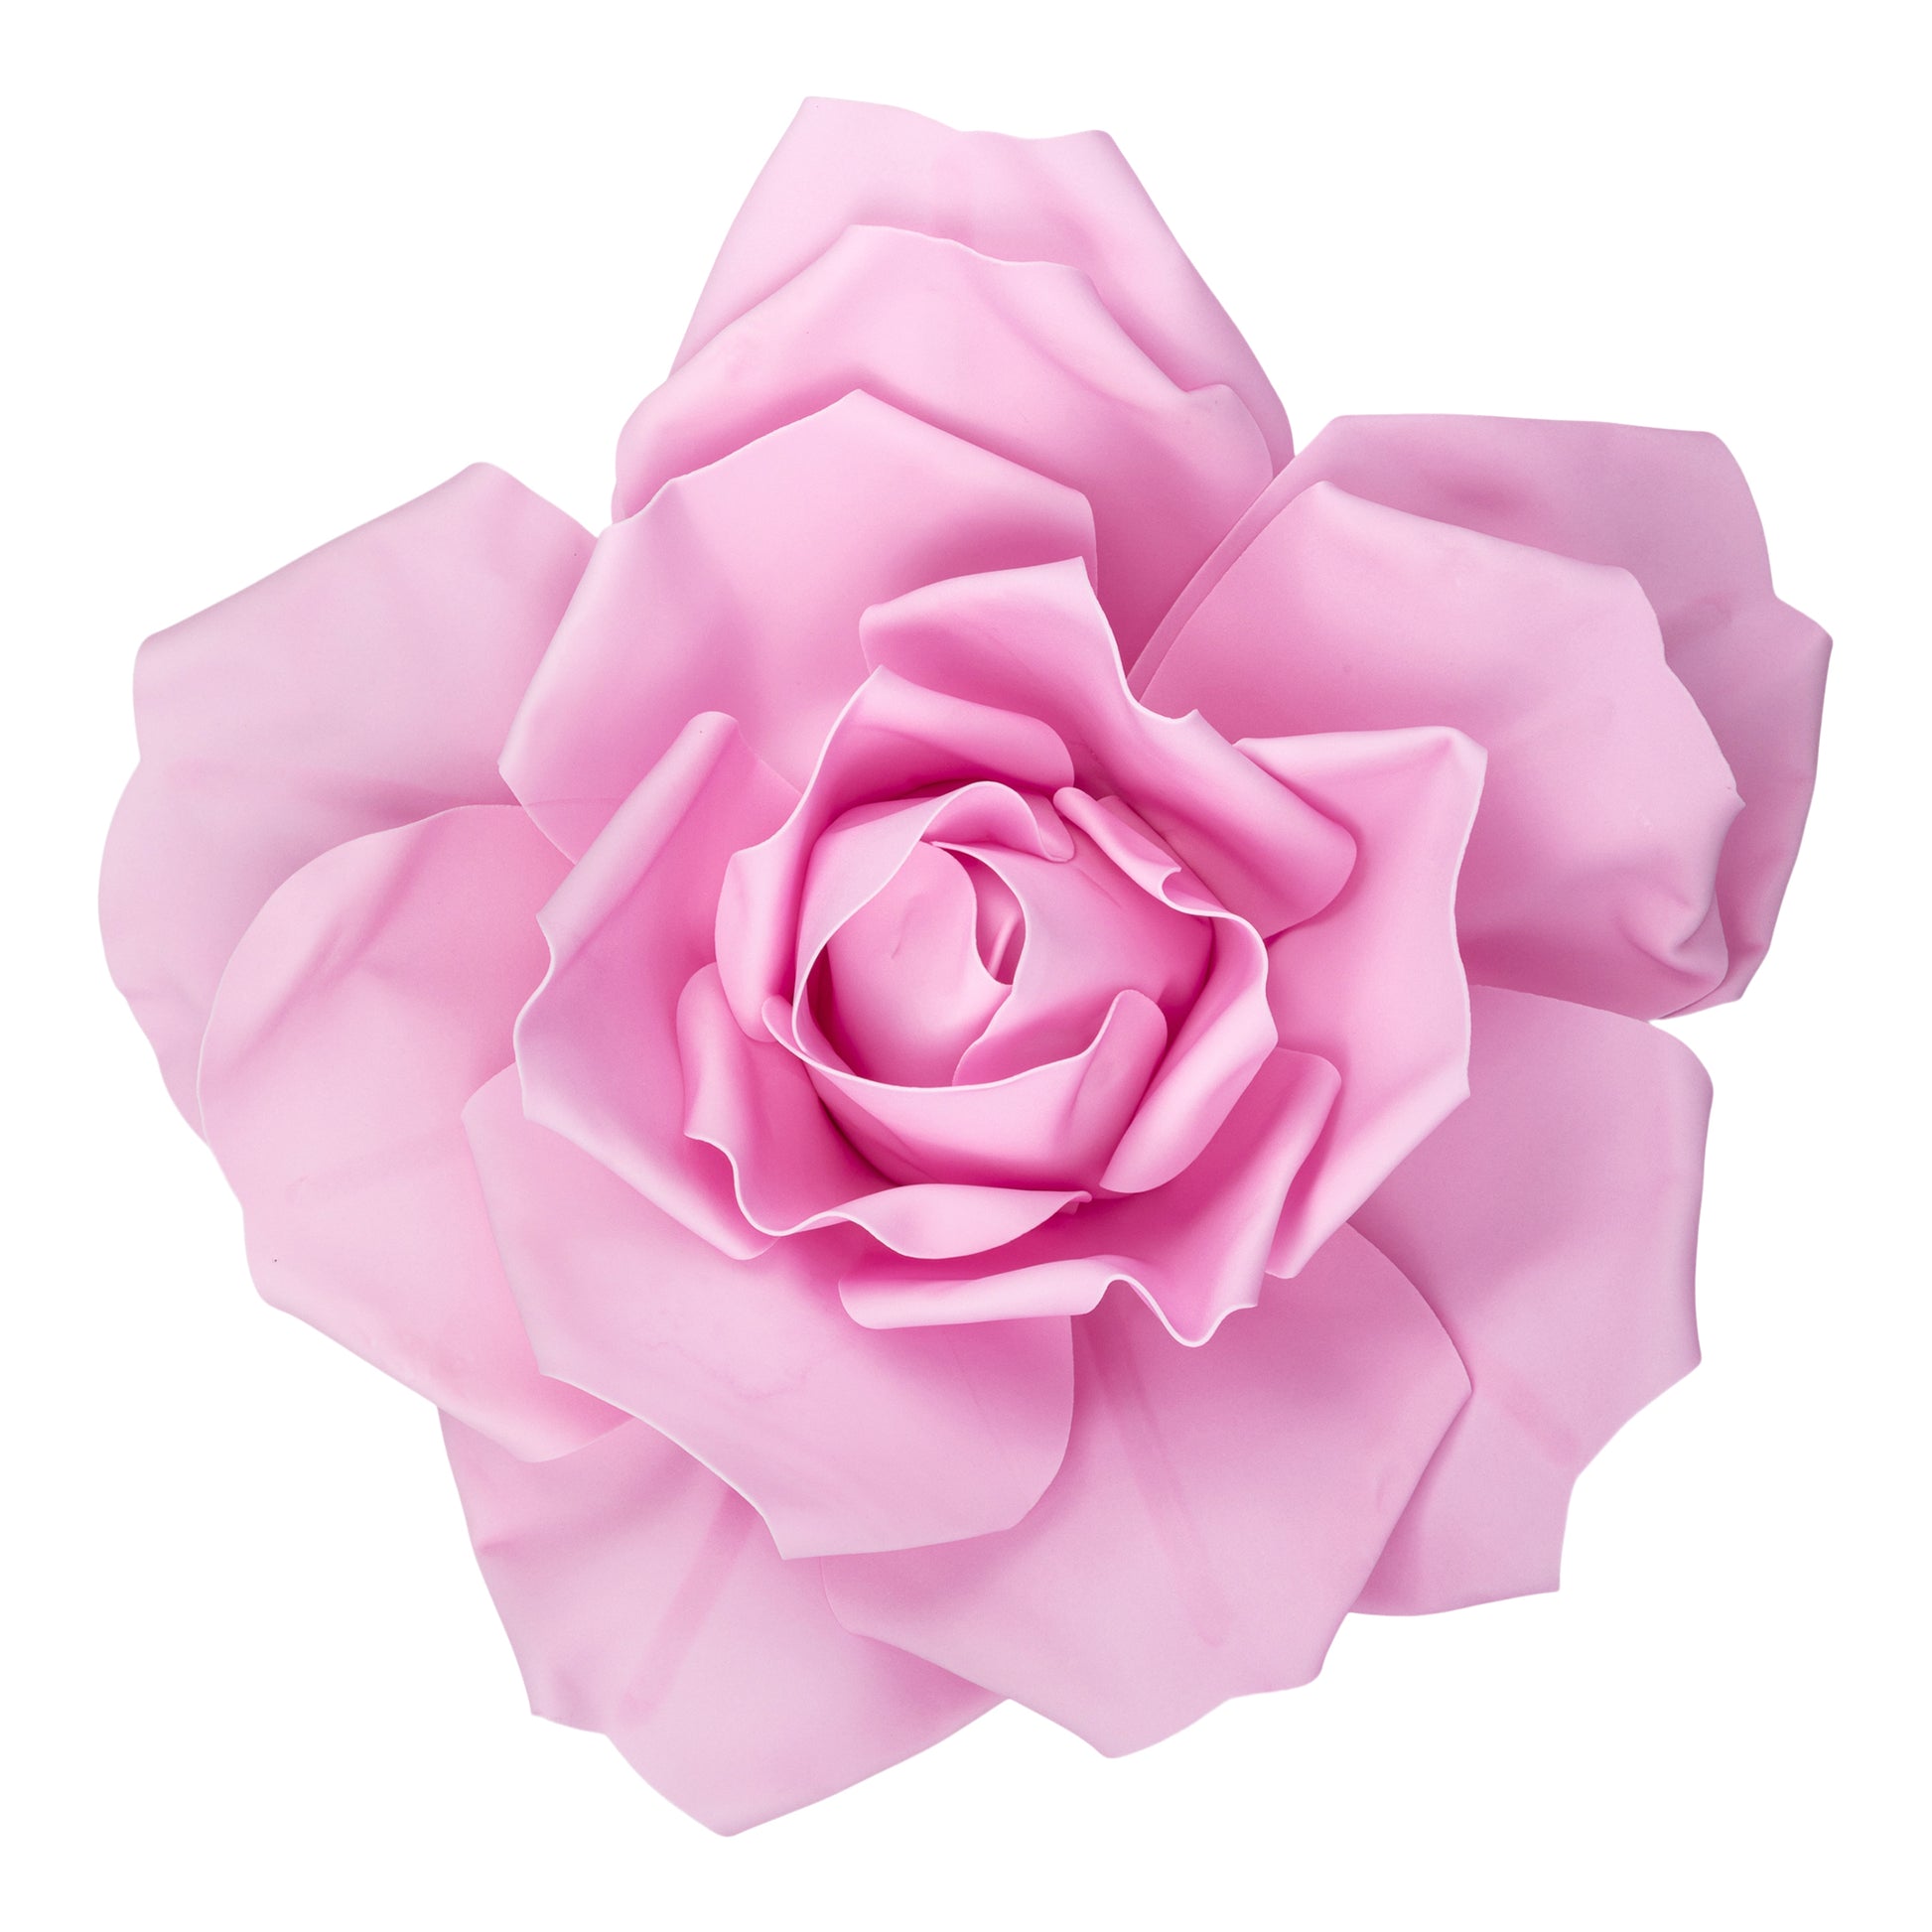 Lighted Large Foam Rose Wall Decor 50 cm - Pink